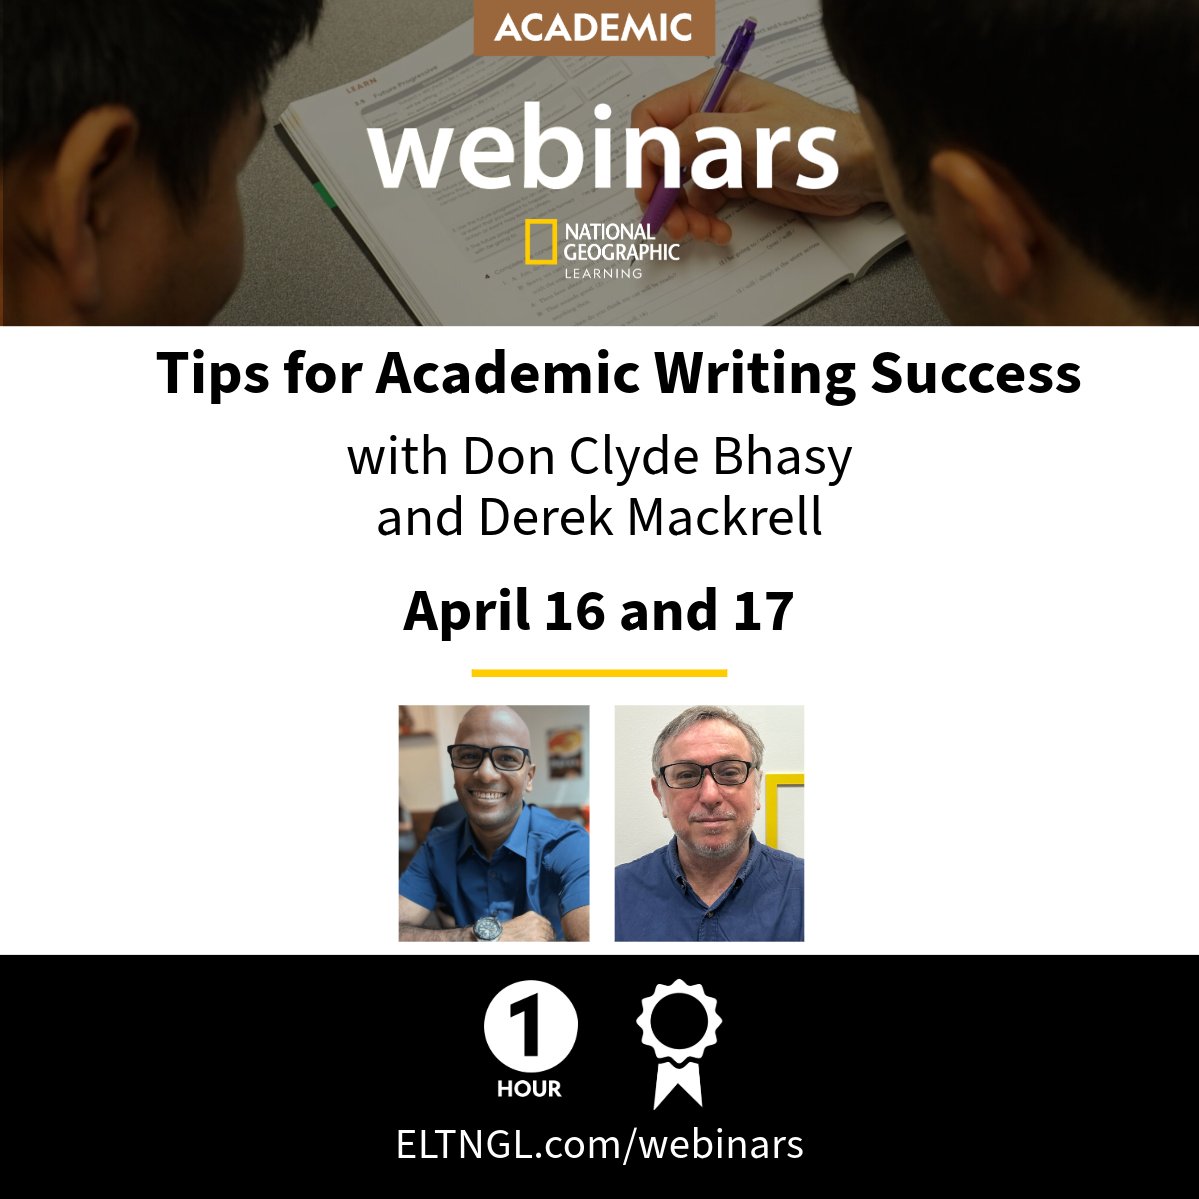 How can we set our students up to be confident, successful writers, whether they're working on simple sentences or academic essays? Join Don Clyde Bhasy and Derek Mackrell for practical tips and activities you can use to help students. 
Reserve your place> bit.ly/4a60r3v